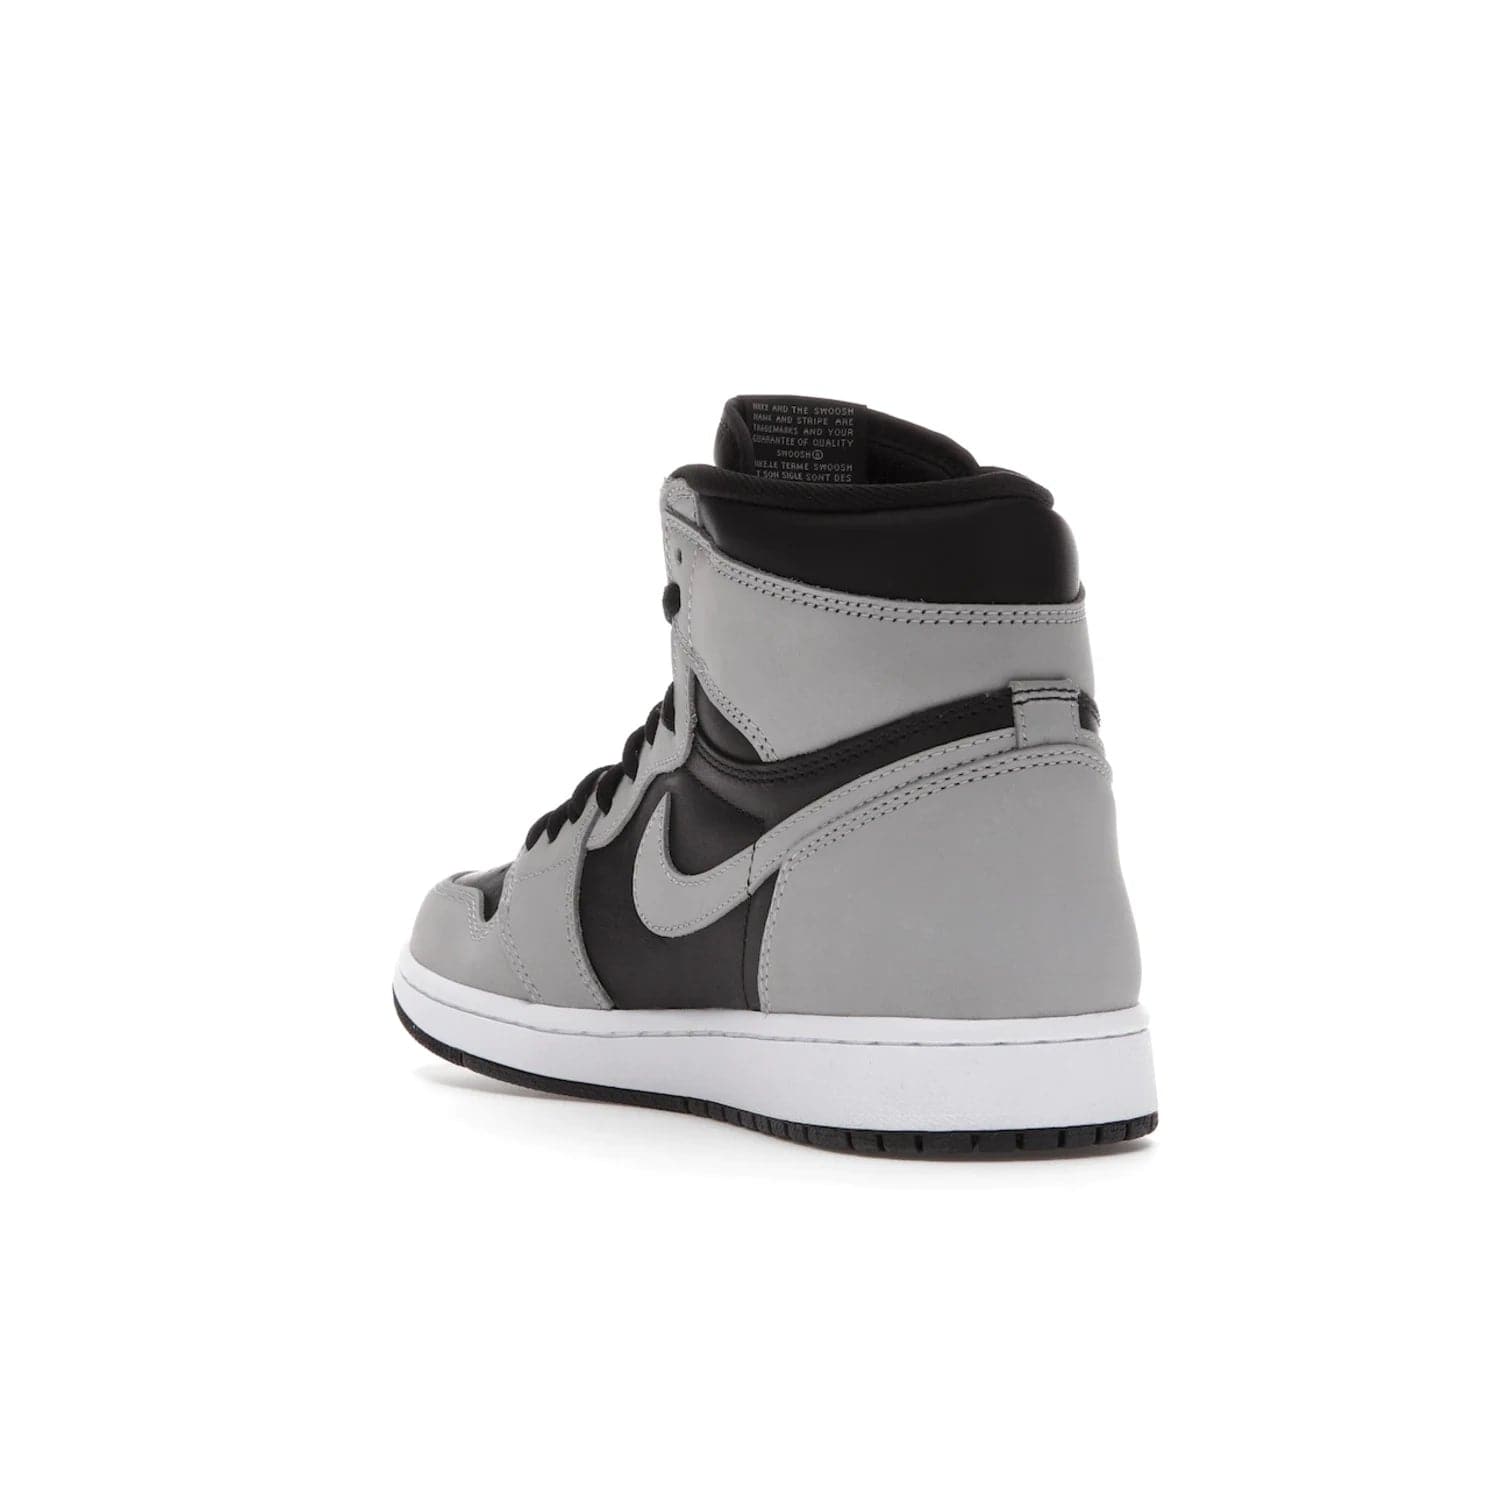 Jordan 1 Retro High Shadow 2.0 - Image 25 - Only at www.BallersClubKickz.com - #
Classic Air Jordan 1 Retro High Shadow 2.0 with black leather base and Light Smoke Grey overlays. Released in May 2021.